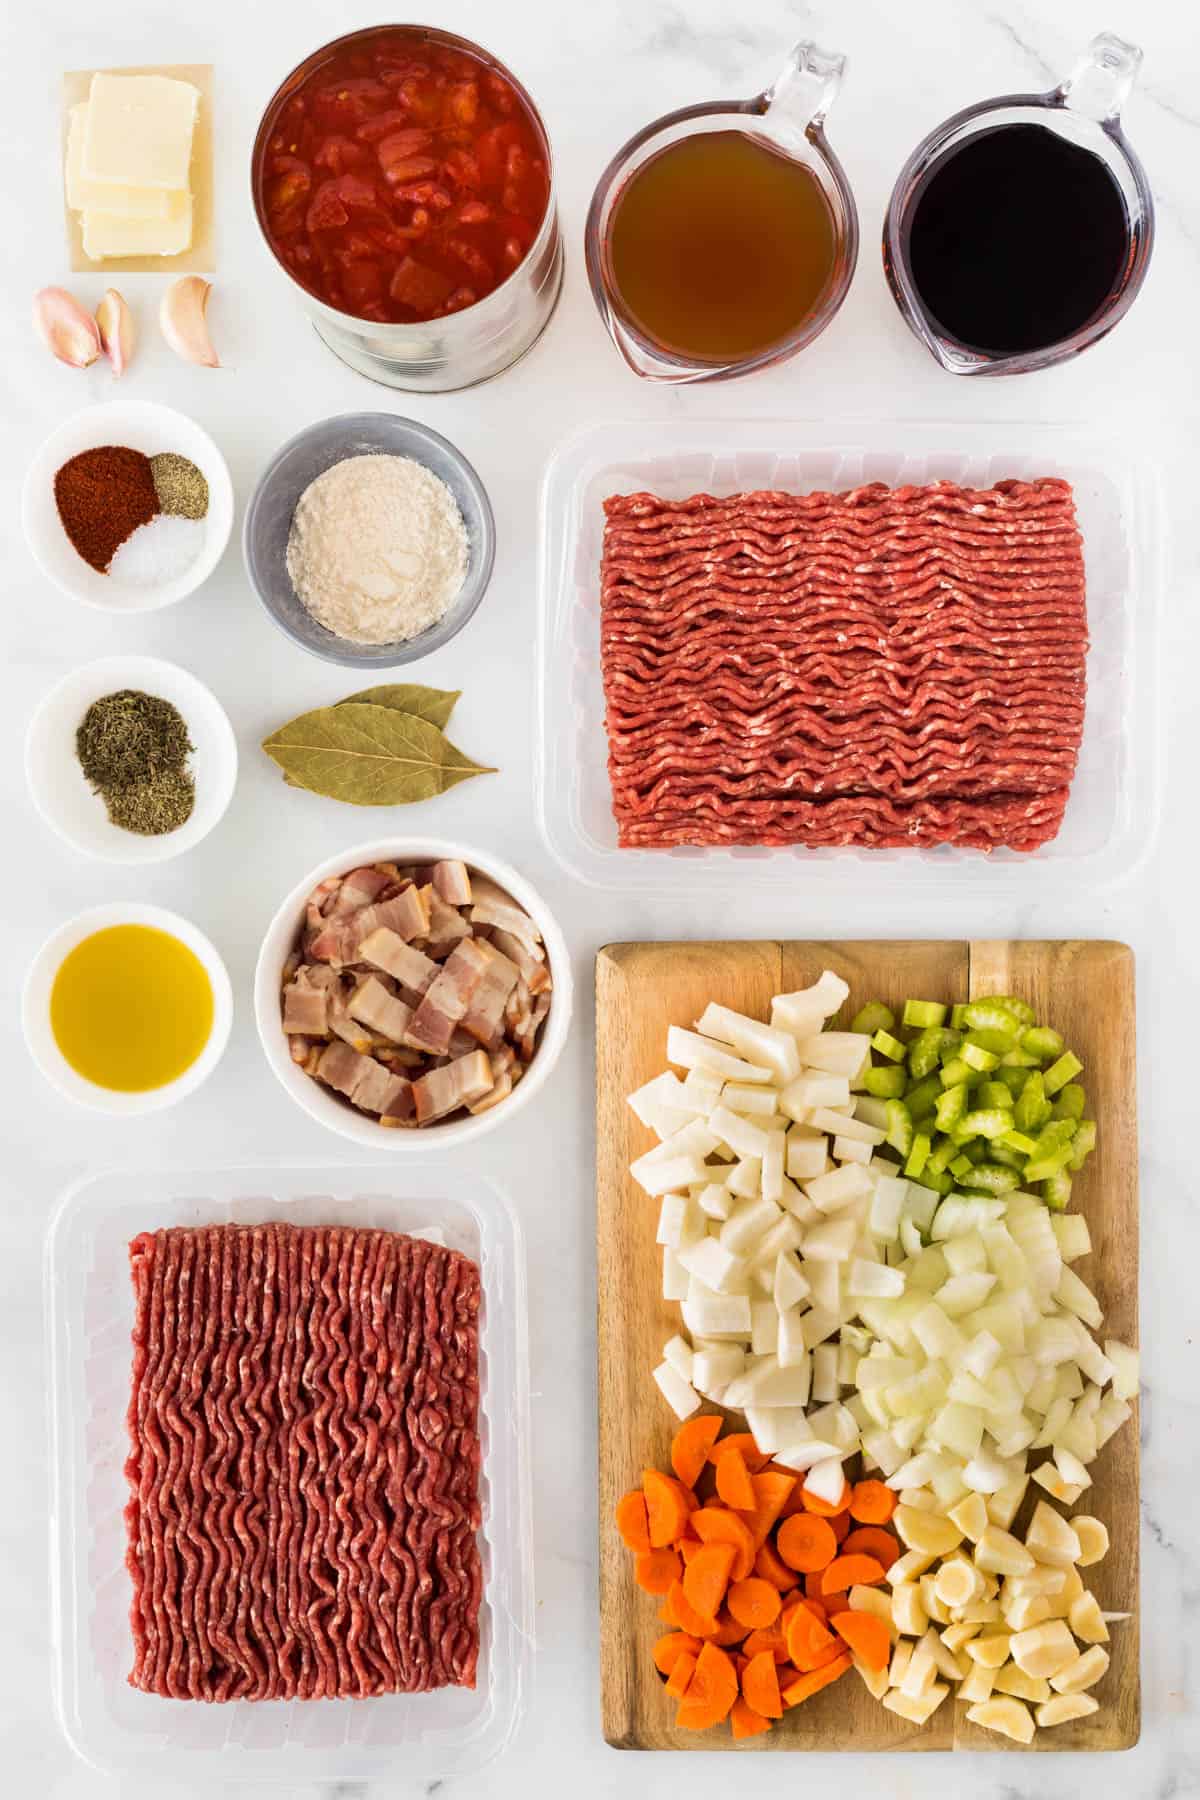 Ingredients for the meat and vegetable layer of cottage pie